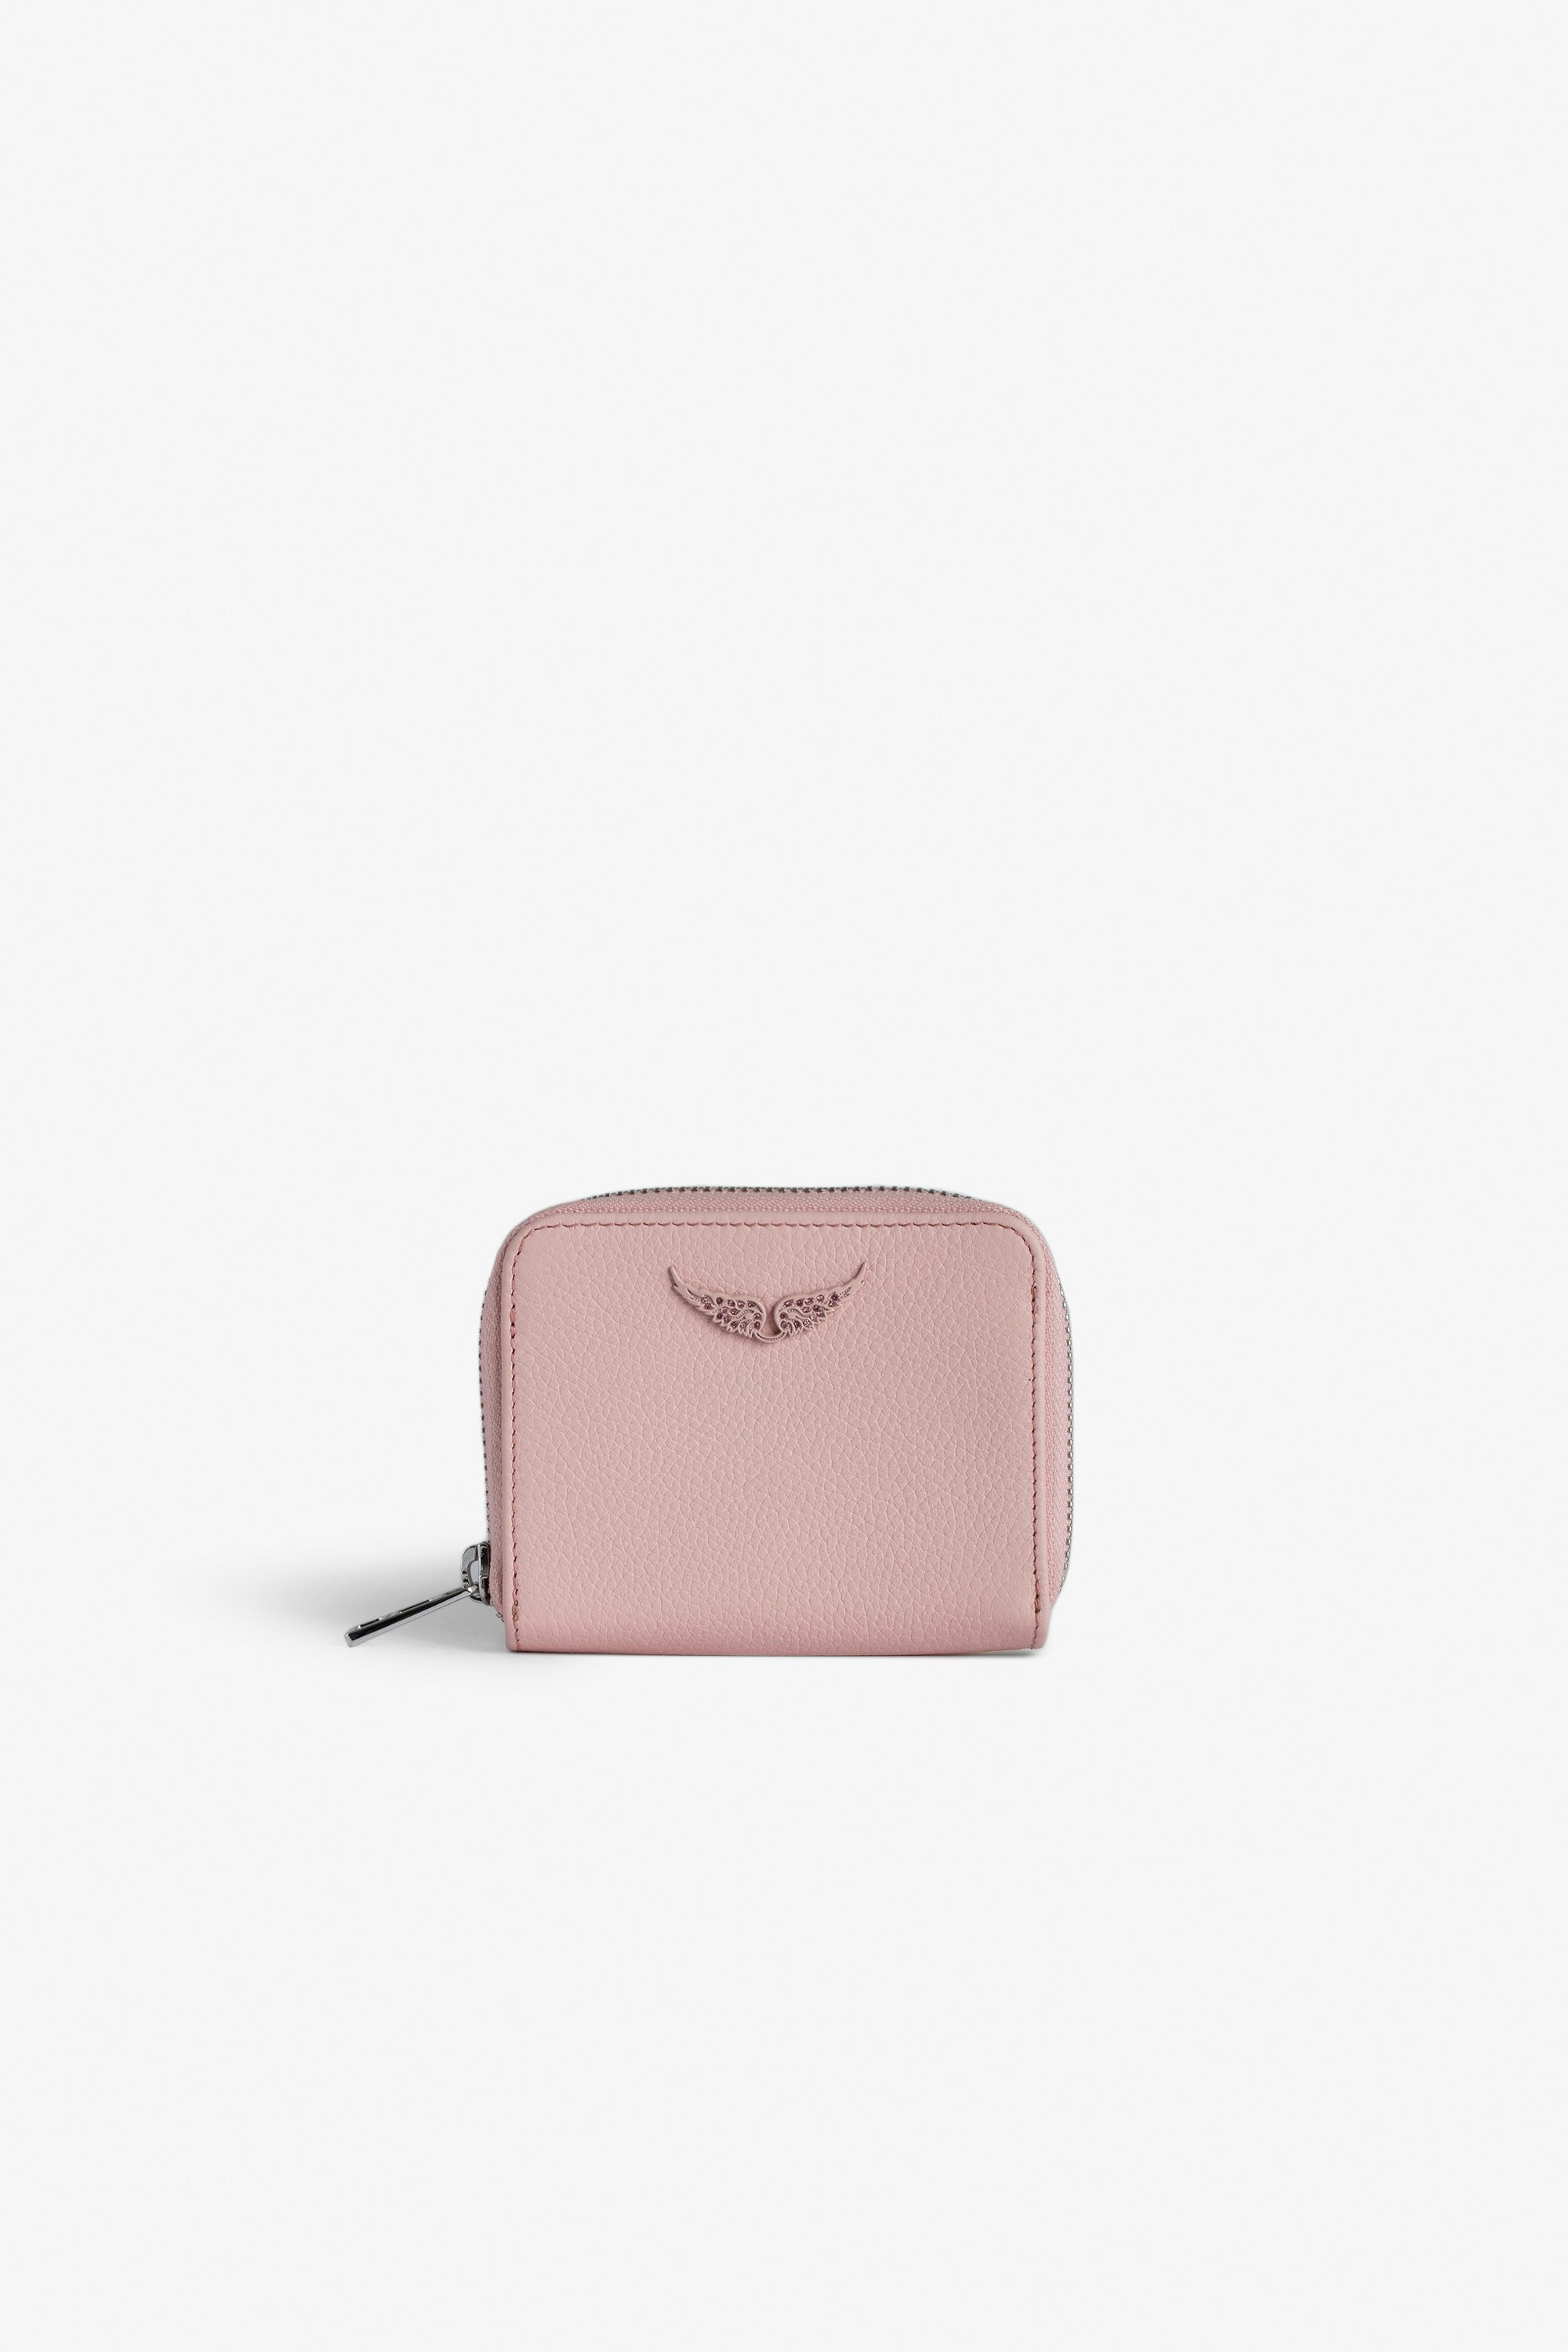 Mini ZV Coin Purse - Women’s pink grained leather wallet with diamanté wings charm.